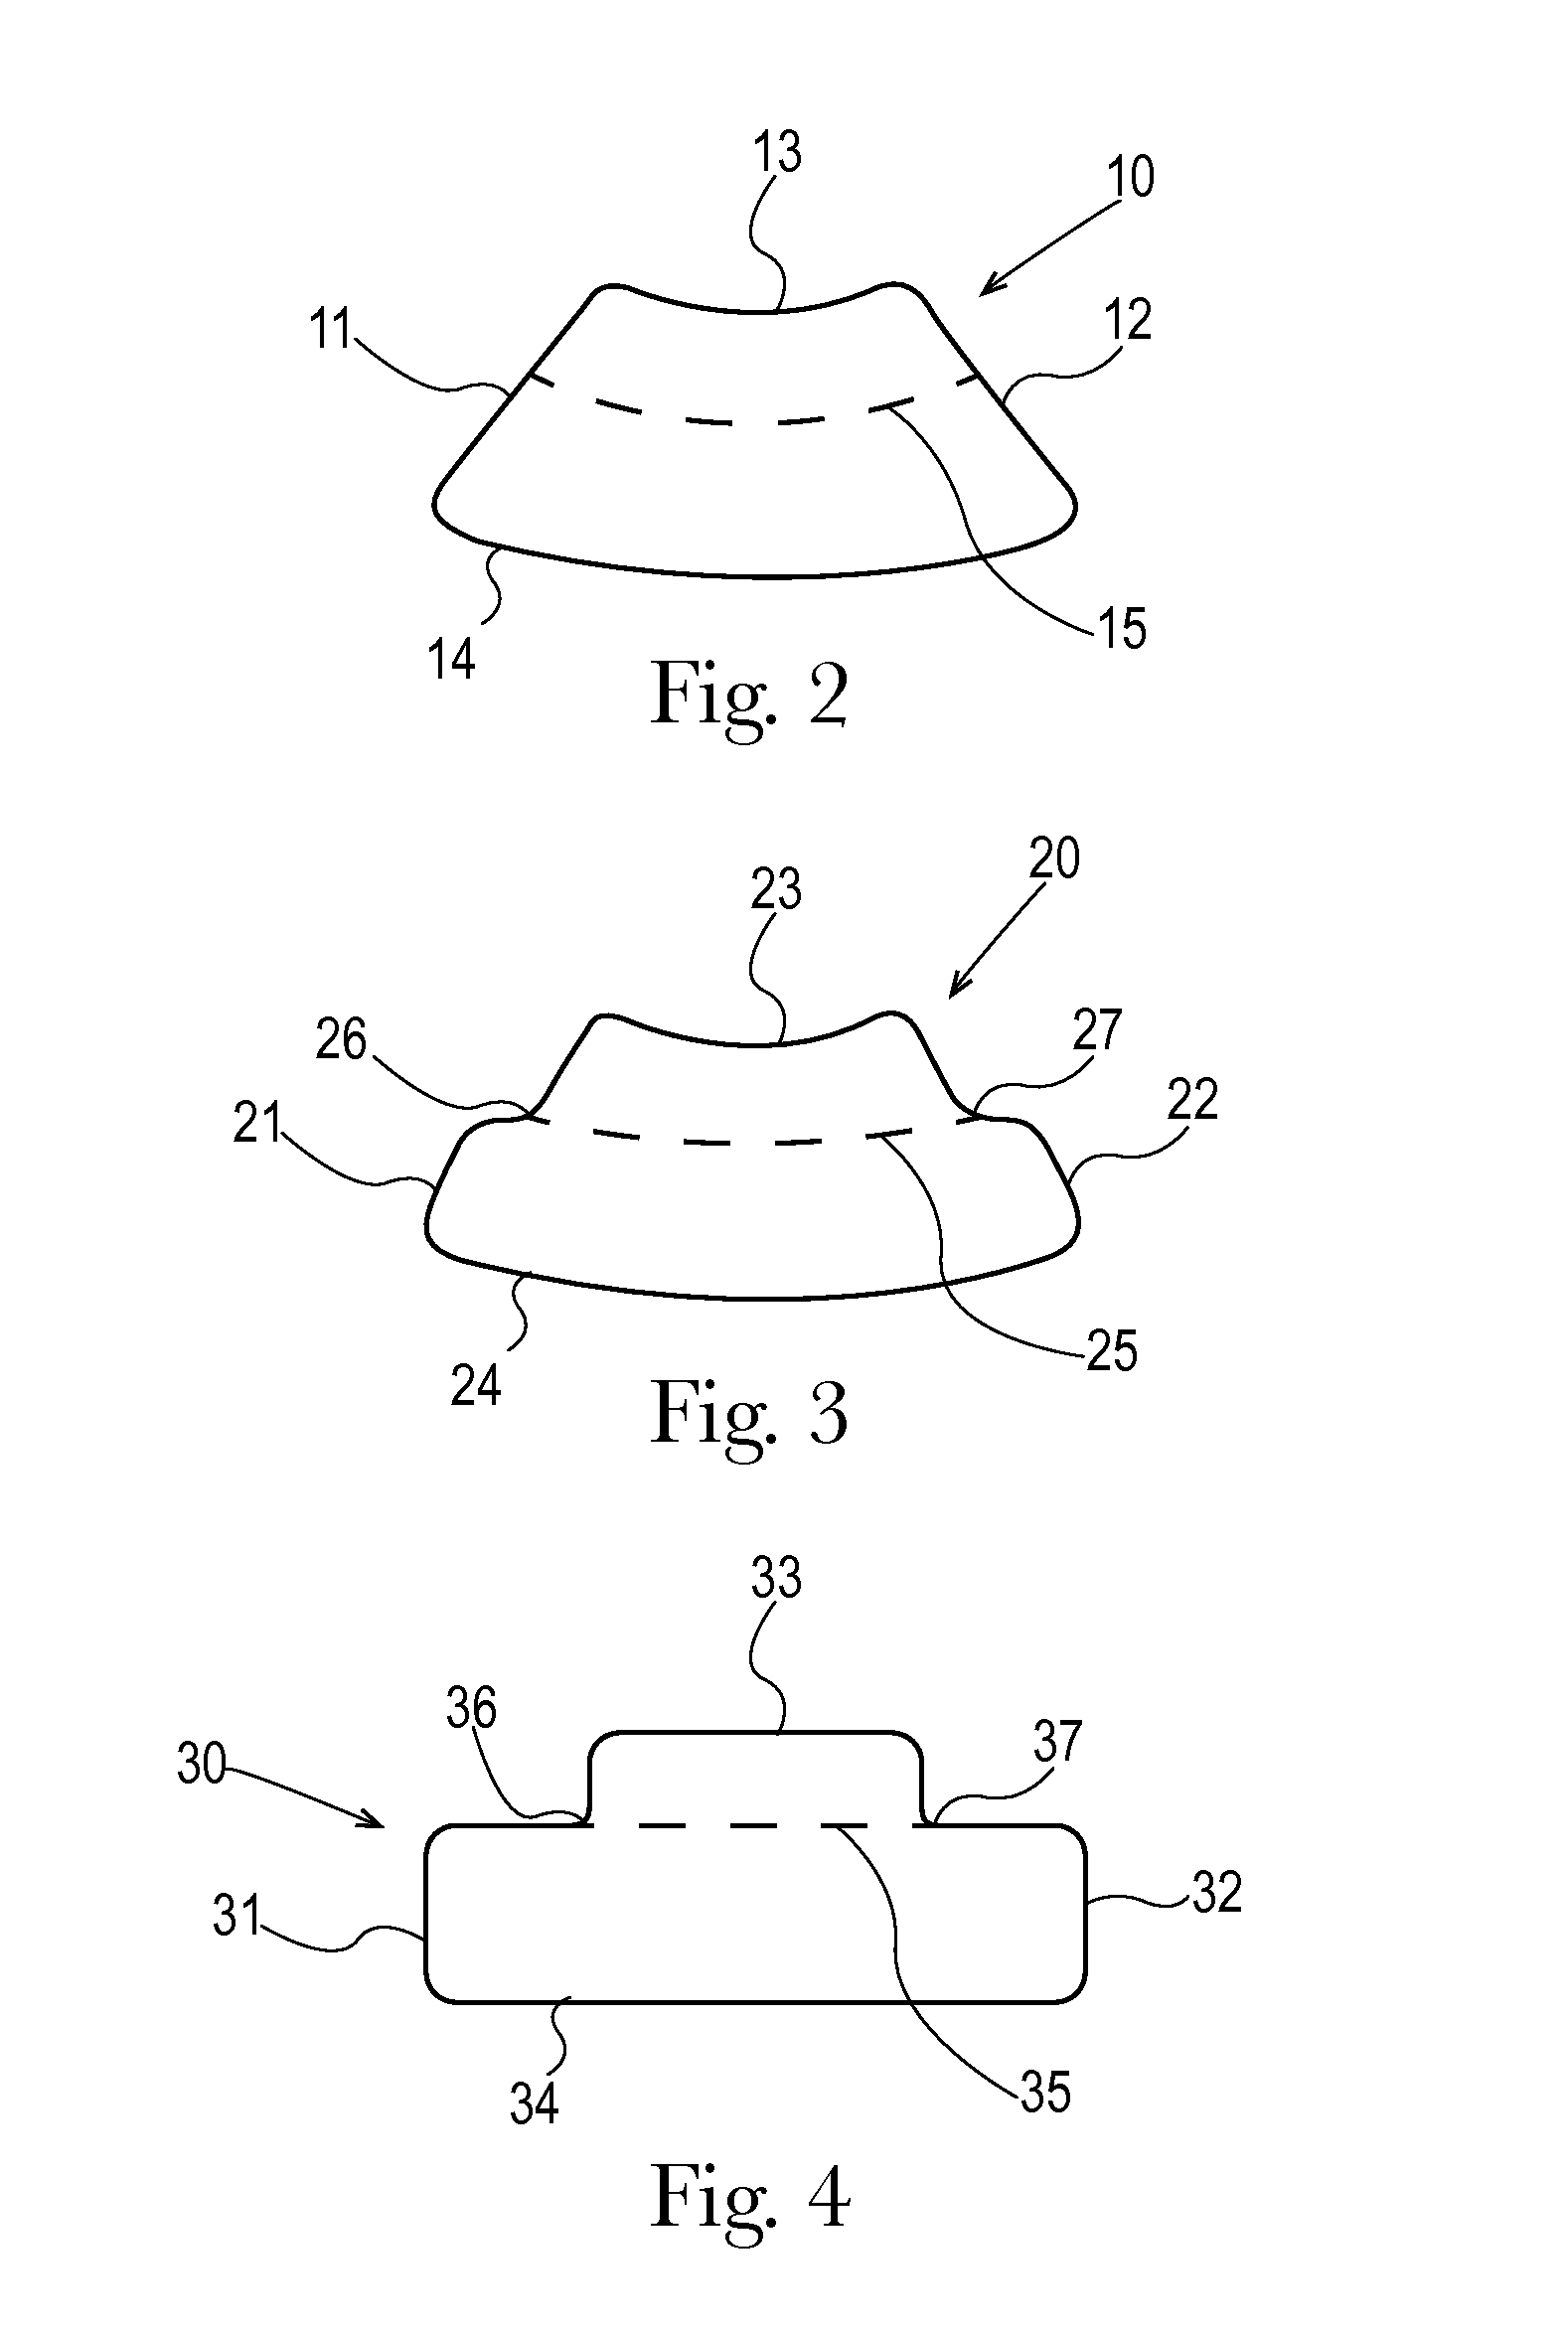 Strip for the Delivery of an Oral Care Active and Methods for Applying Oral Care Actives